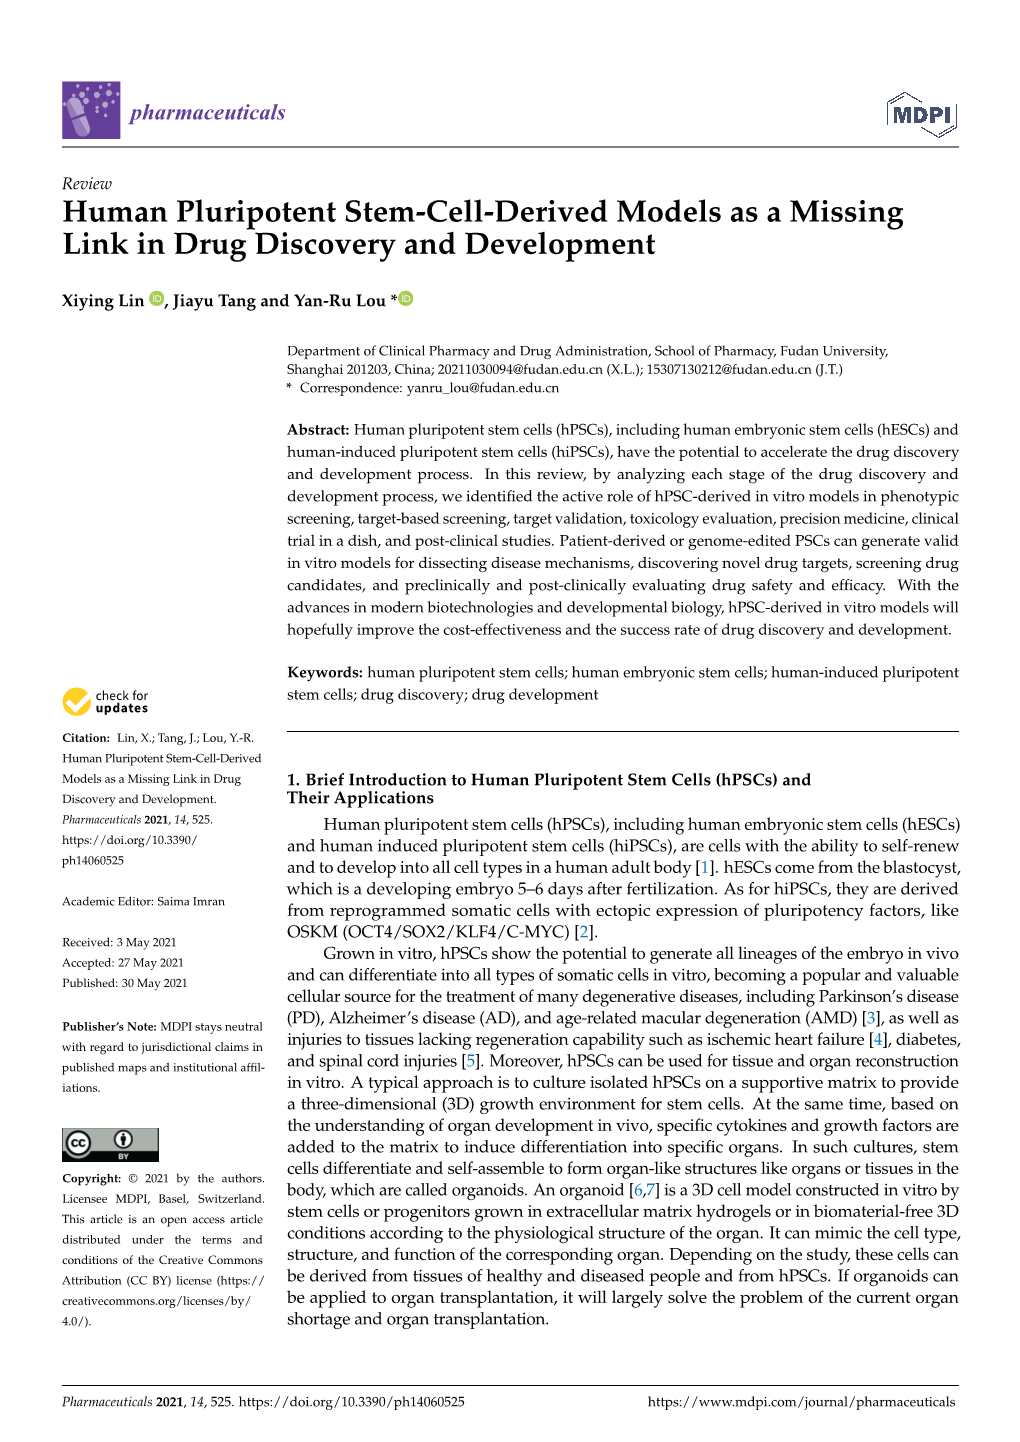 Human Pluripotent Stem-Cell-Derived Models As a Missing Link in Drug Discovery and Development